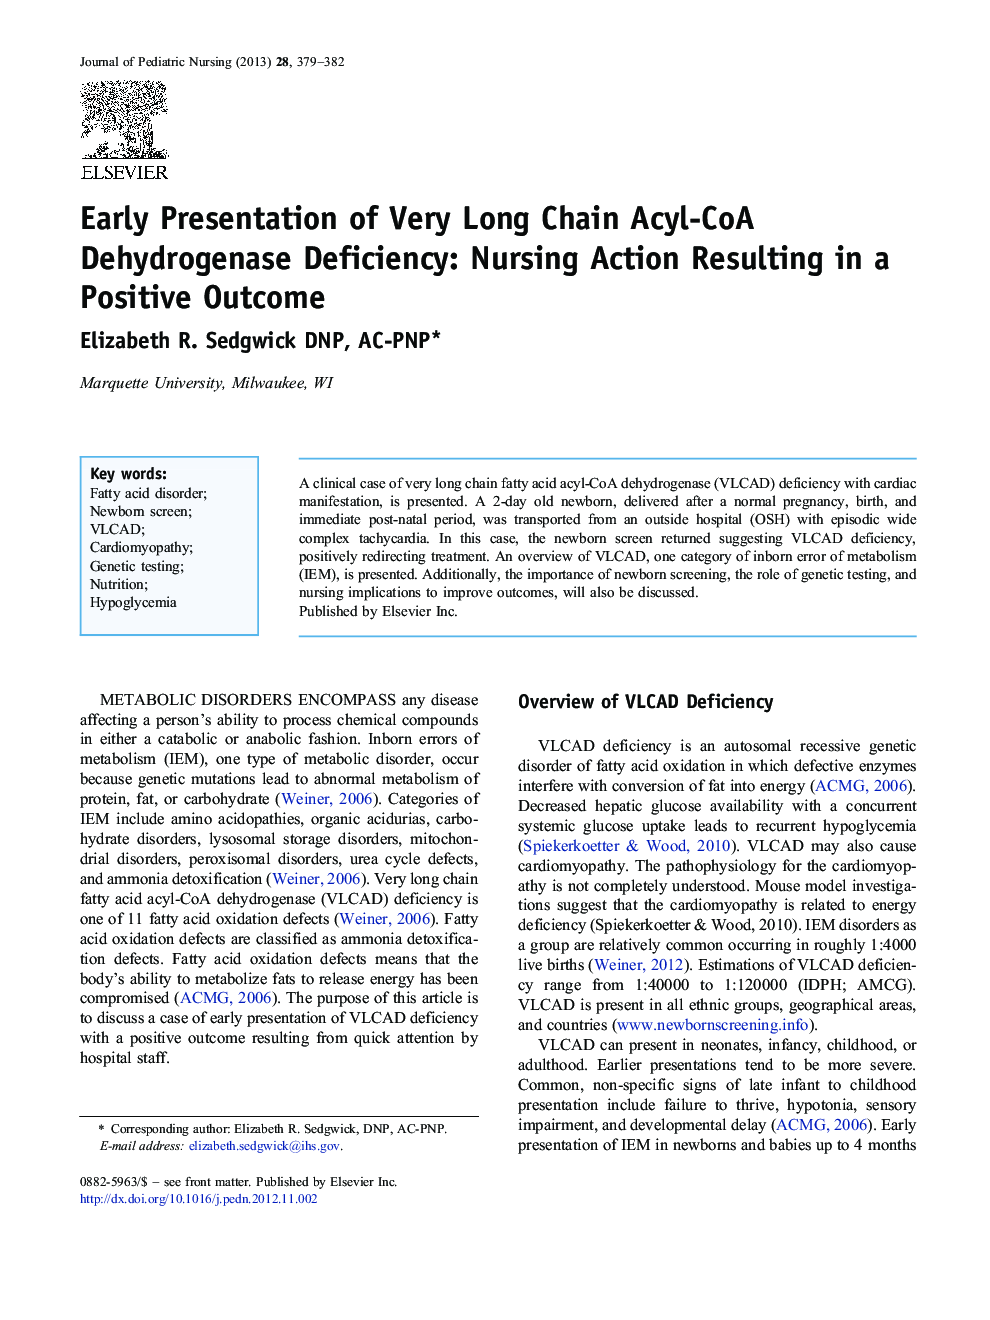 Early Presentation of Very Long Chain Acyl-CoA Dehydrogenase Deficiency: Nursing Action Resulting in a Positive Outcome